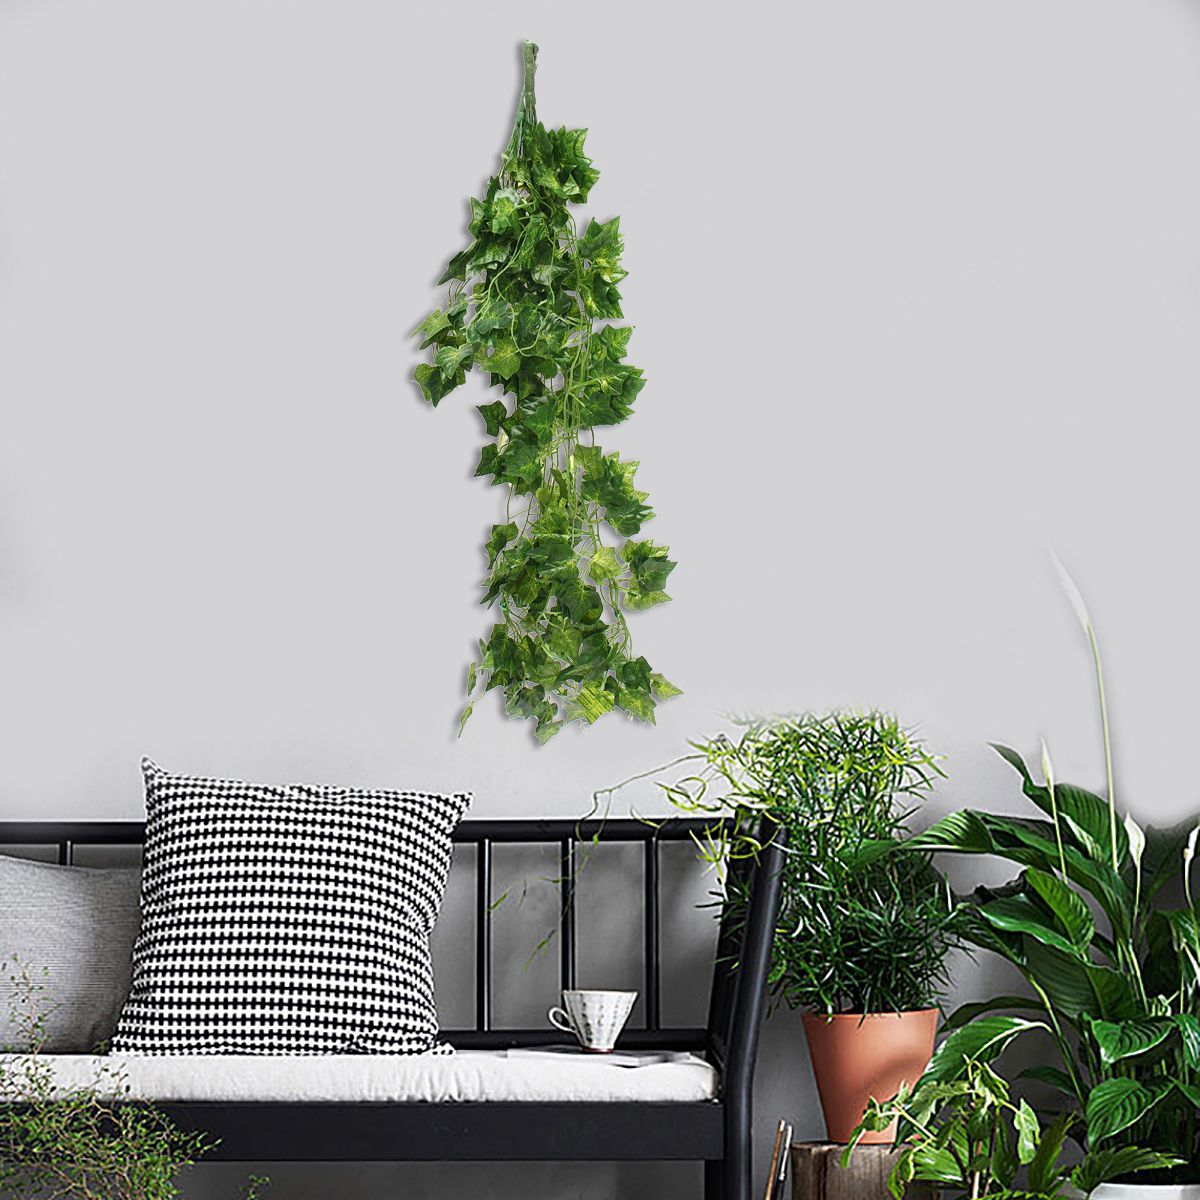 Artificial-Hanging-Plant-Foliage-Leaves-Vine-Garland-Wedding-Home-Cafe-Decor-Supplies-1530237